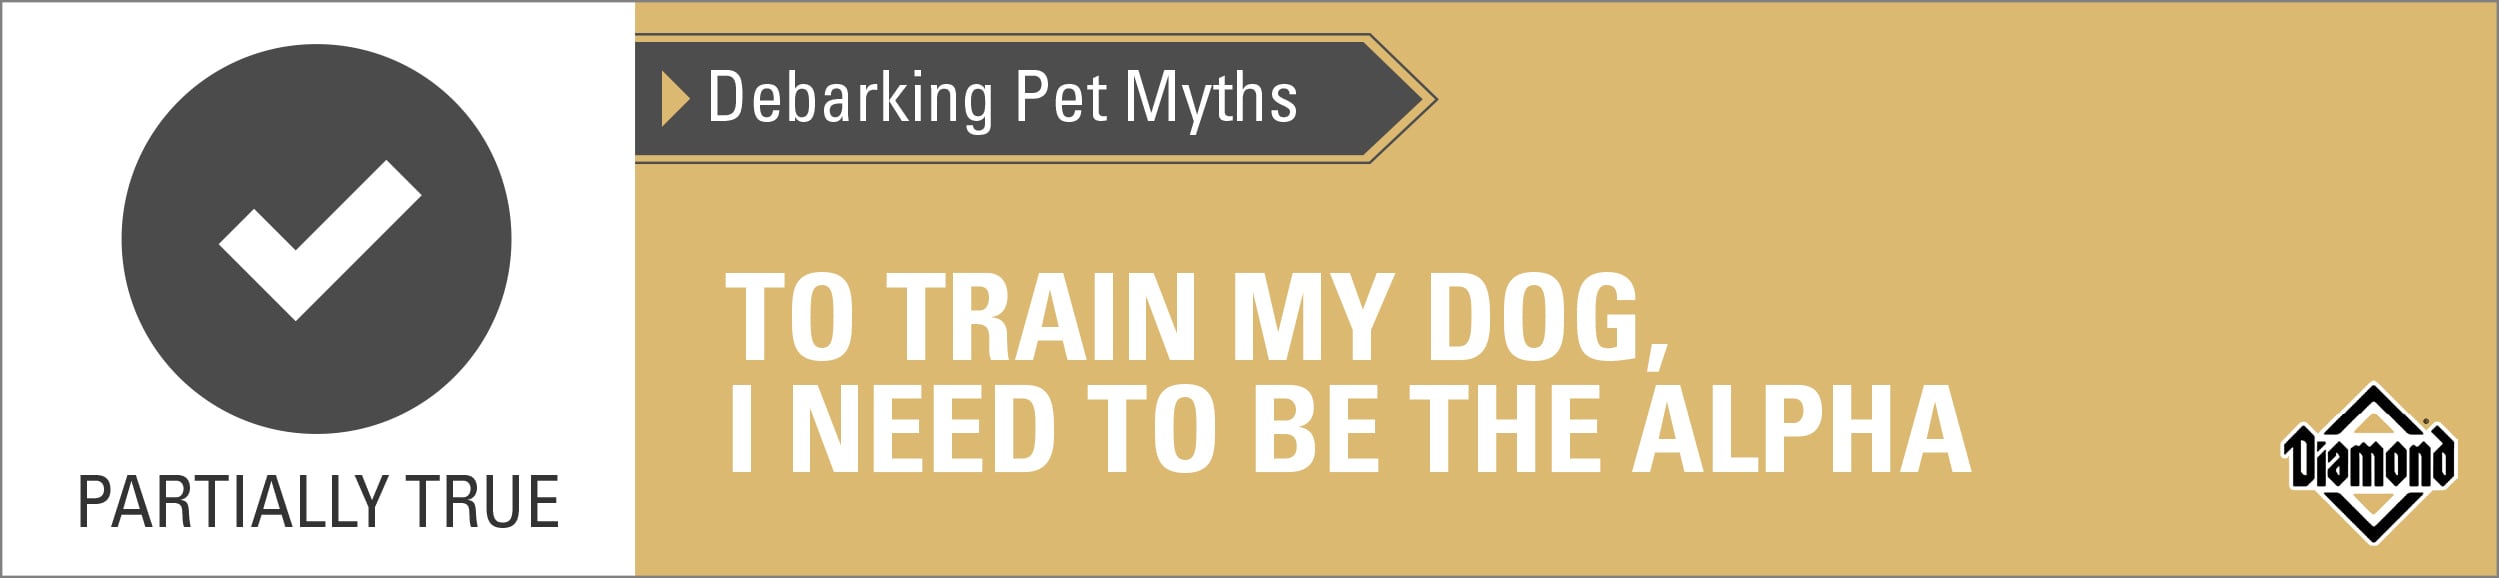 Partially True: To Train My Dog, I Need to Be the Alpha | Diamond Pet Foods